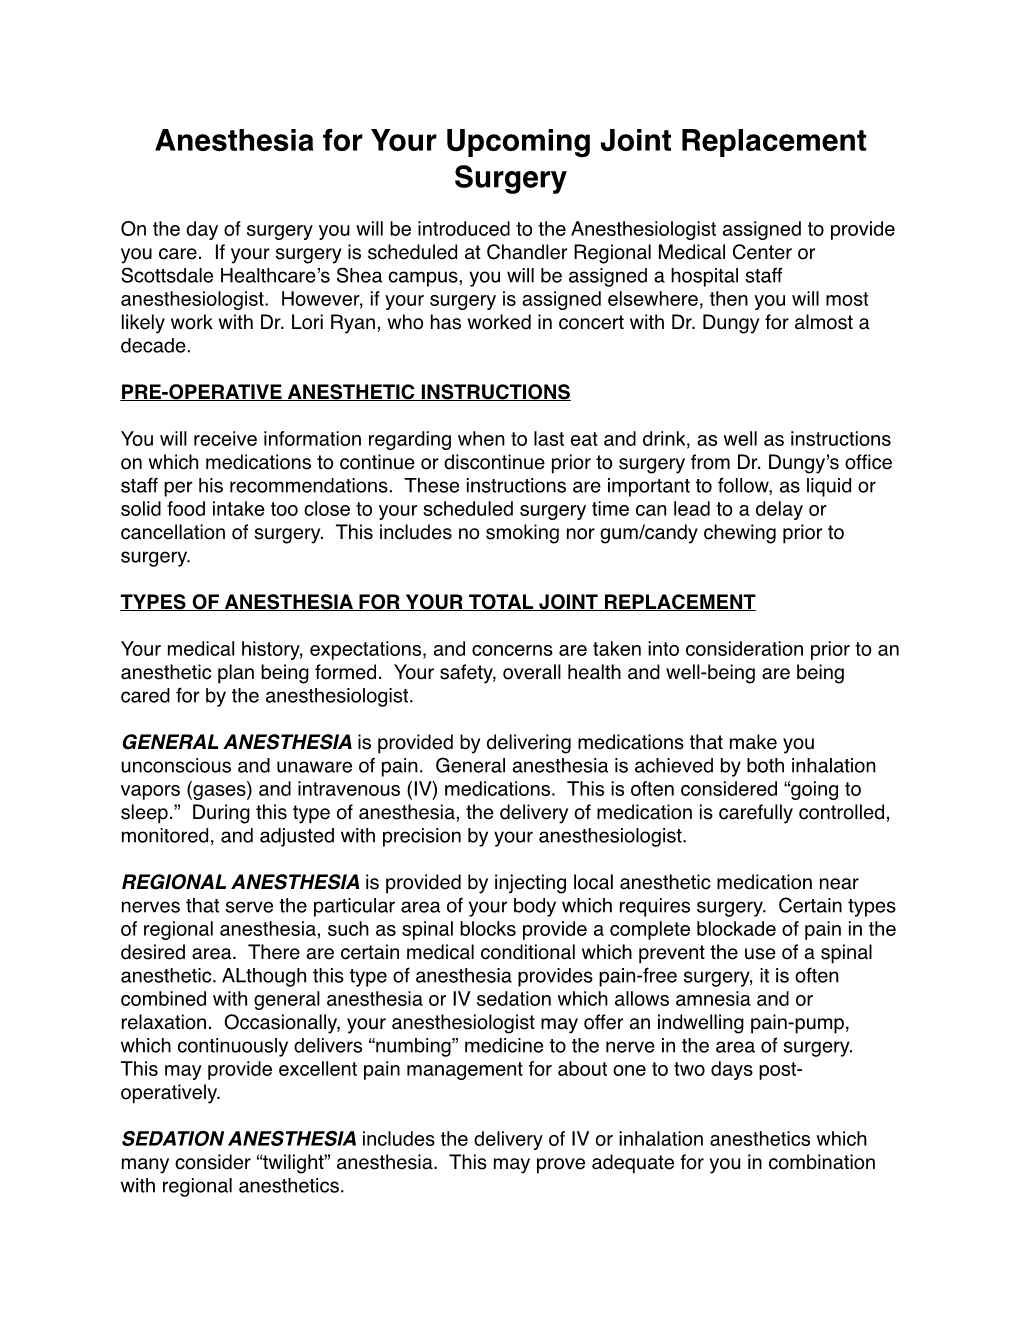 Anesthesia Pre – Operative Information for Joint Replacement